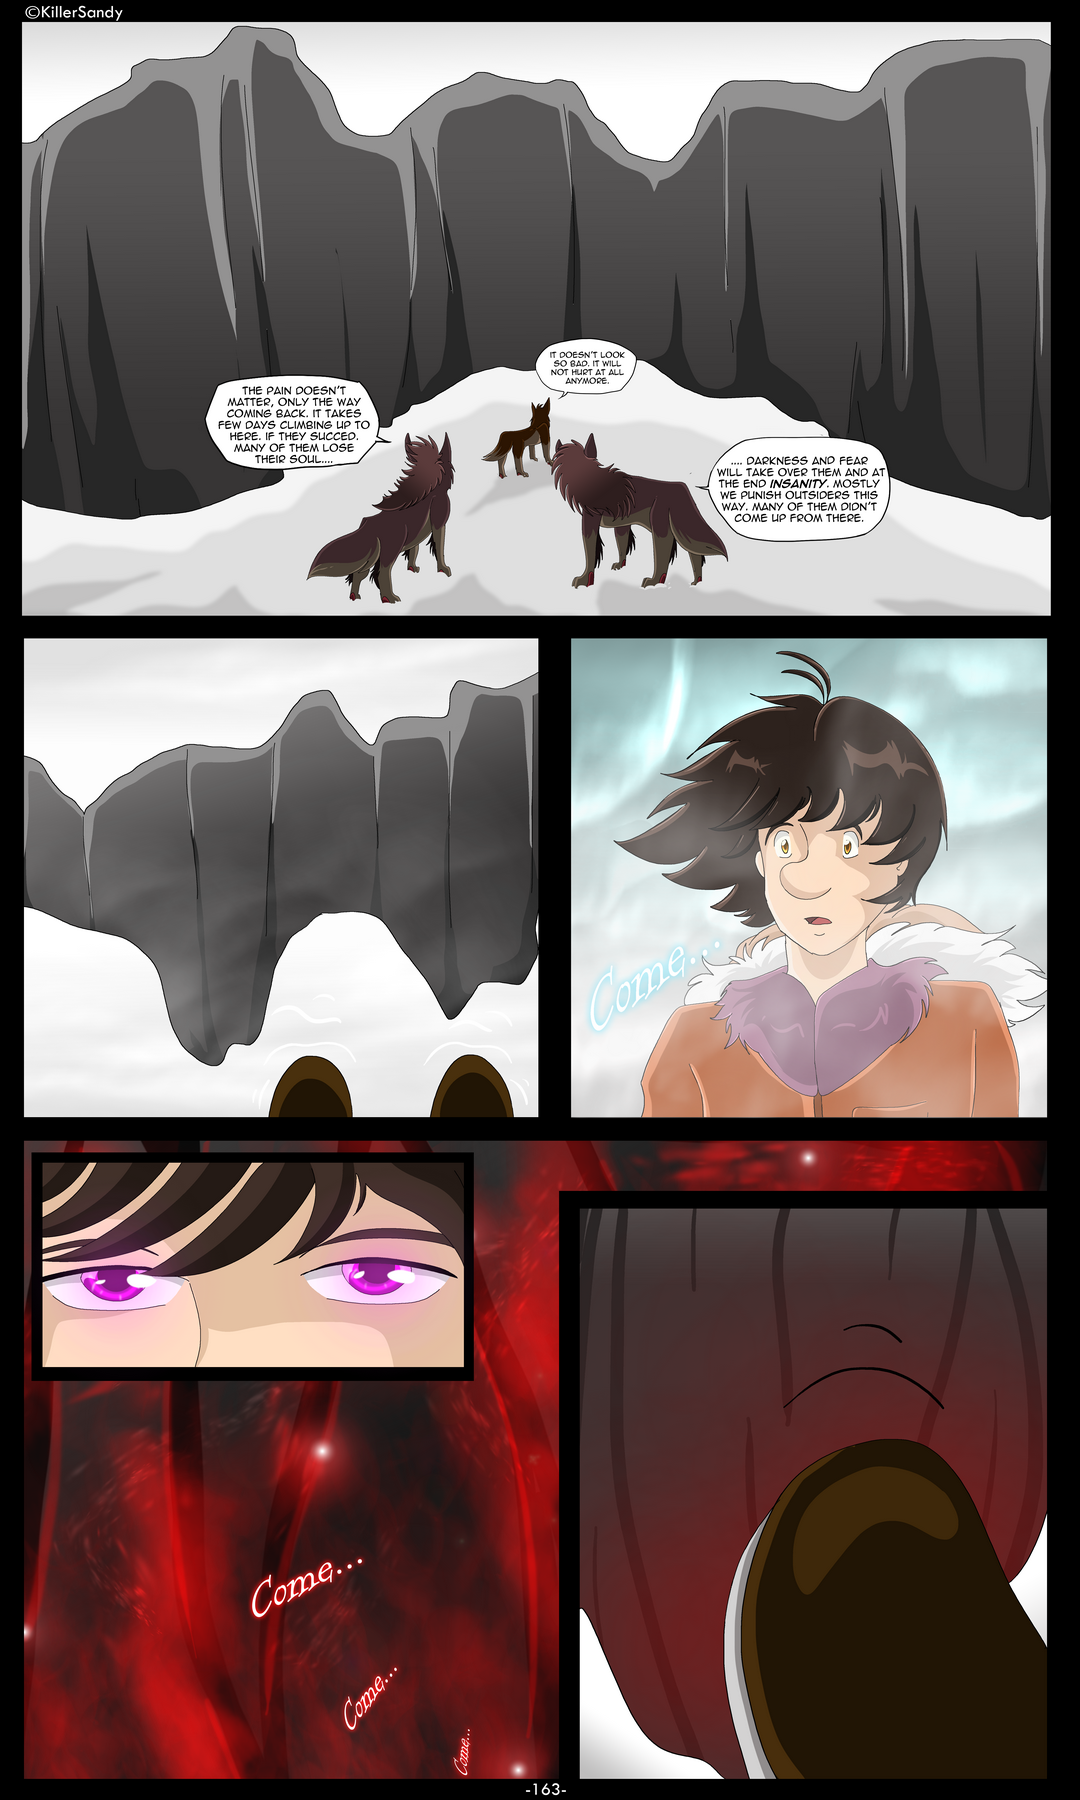 The Prince of the Moonlight Stone page 163